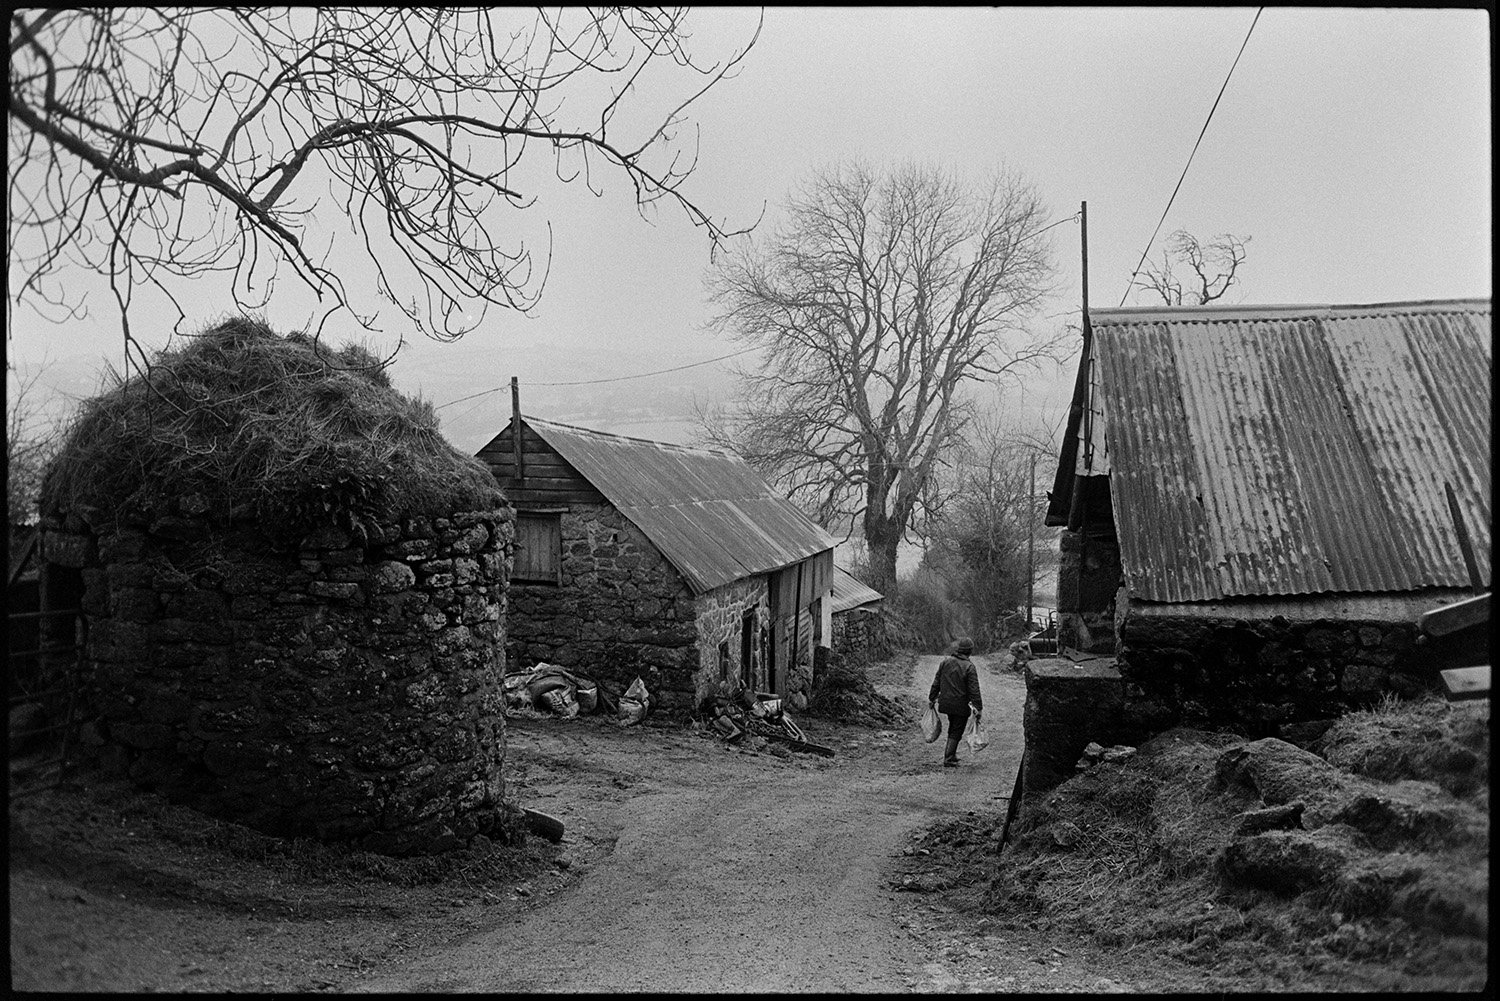 Snow, farmers feeding cattle on moor, photographer taking pictures.
[A farmer carrying sacks down a farm lane between two stone barns with corrugated iron roofs near Chagford, Dartmoor.]